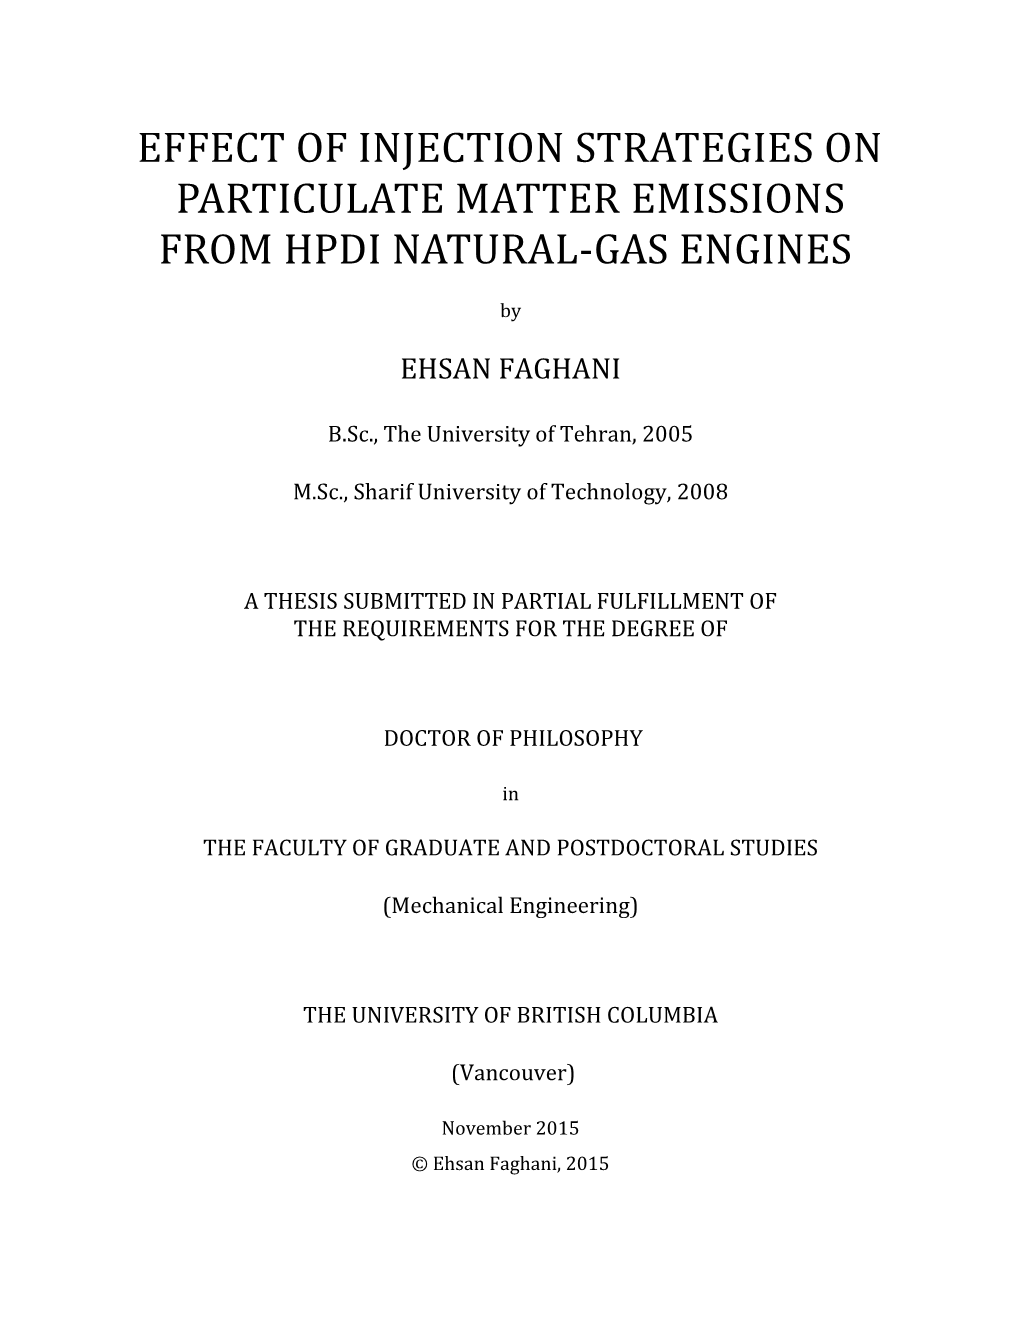 Effect of Injection Strategies on Particulate Matter Emissions From